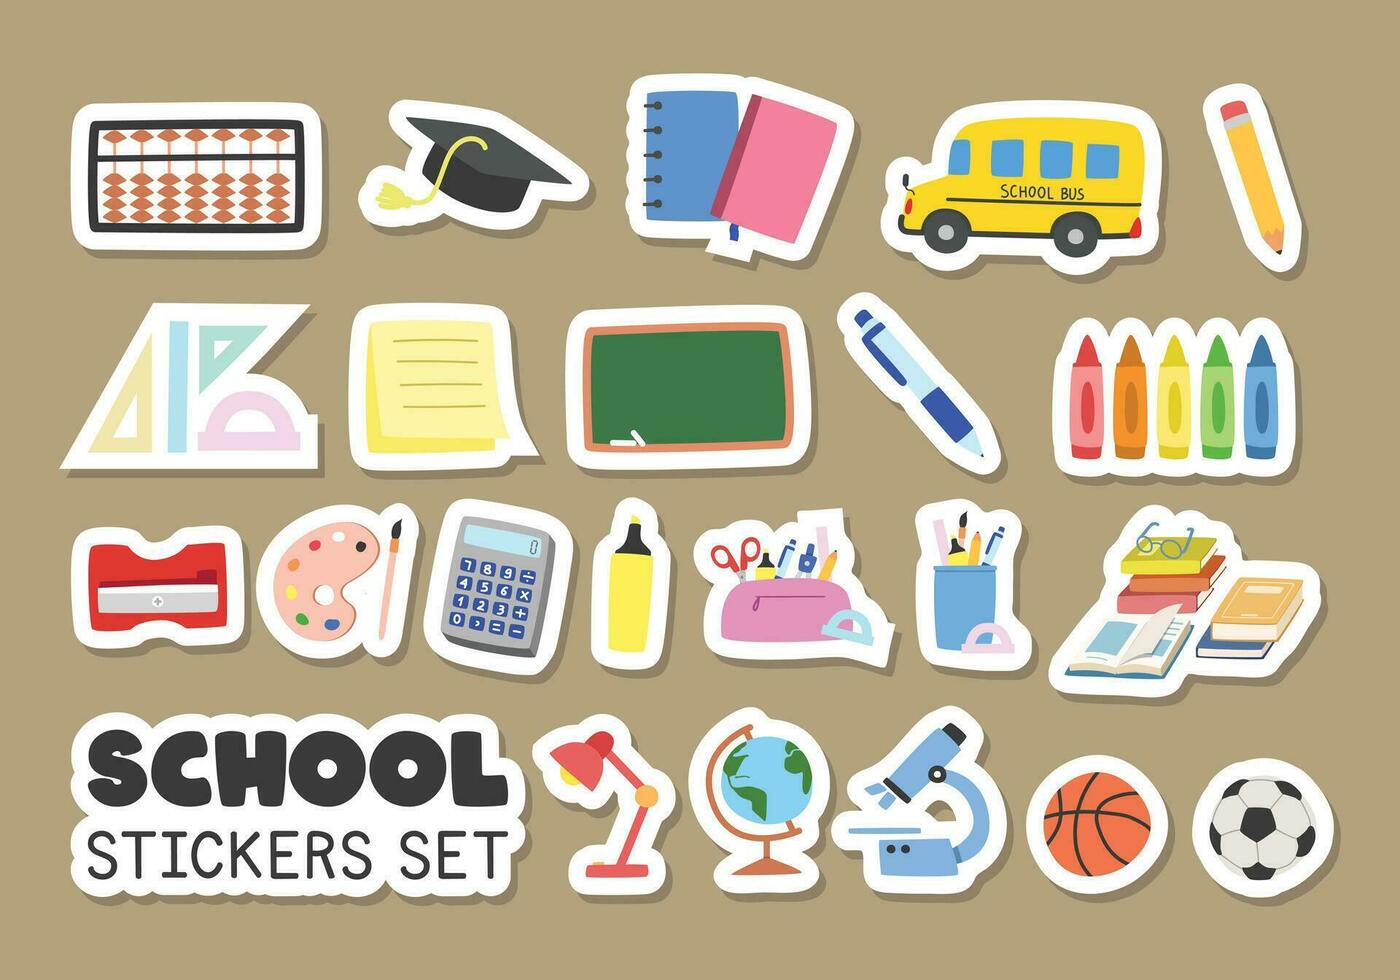 School supplies stickers vector set. Soroban, notebooks, sticky note, pencil case, textbooks, chalkboard flat vector illustration cartoon style clipart. Students, classroom, back to school concept